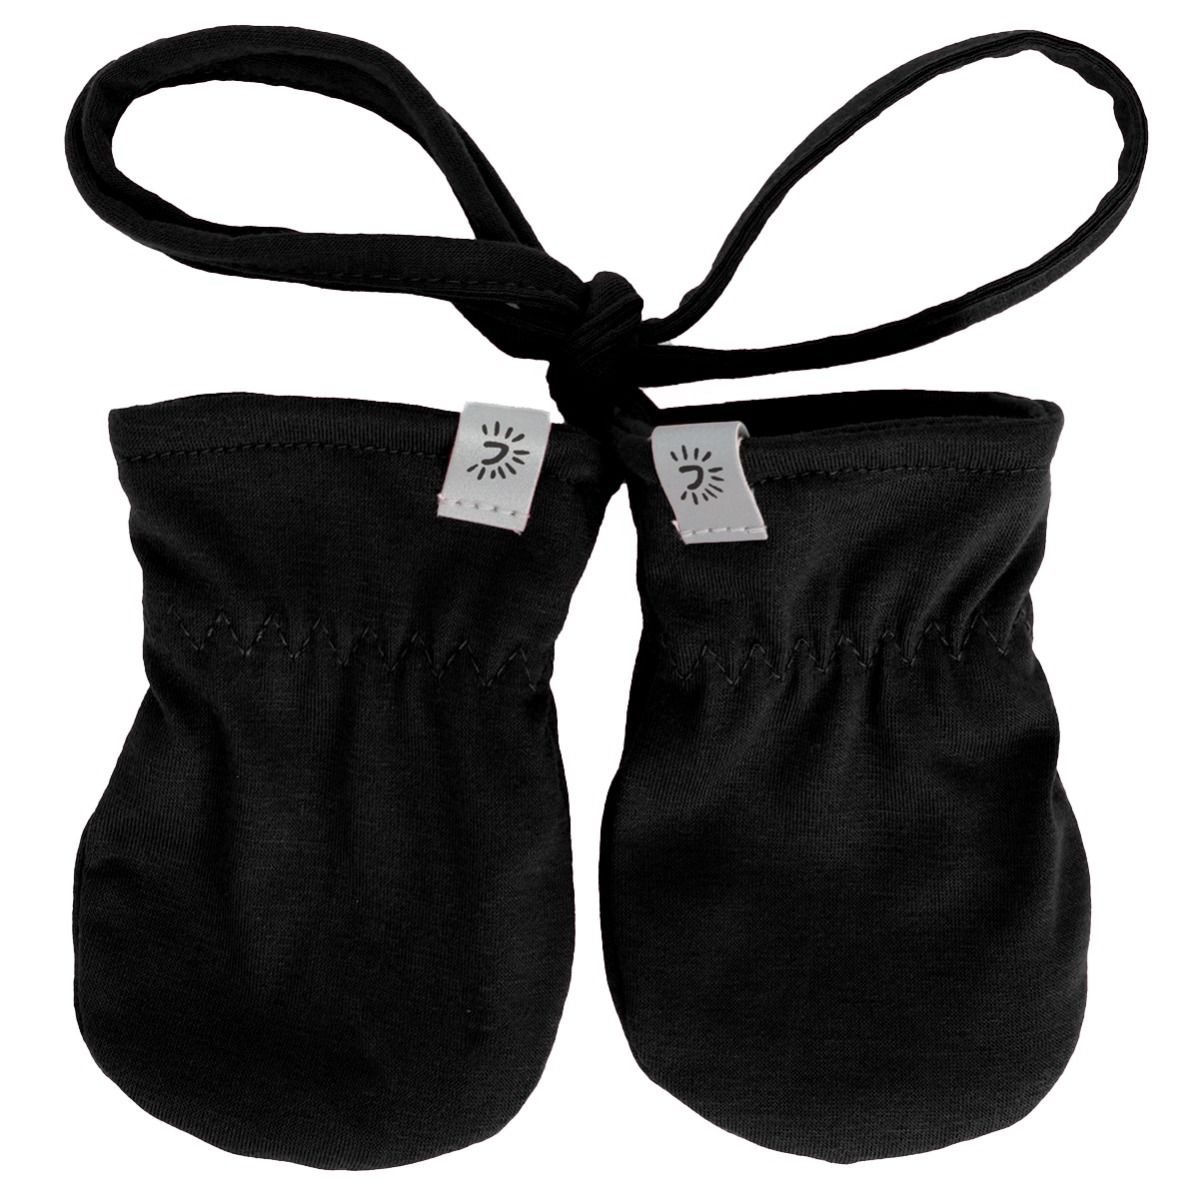 Baby Girl Toddler Enfants Automne ABS Mitaines avec String Gants taille 1-5 ans 